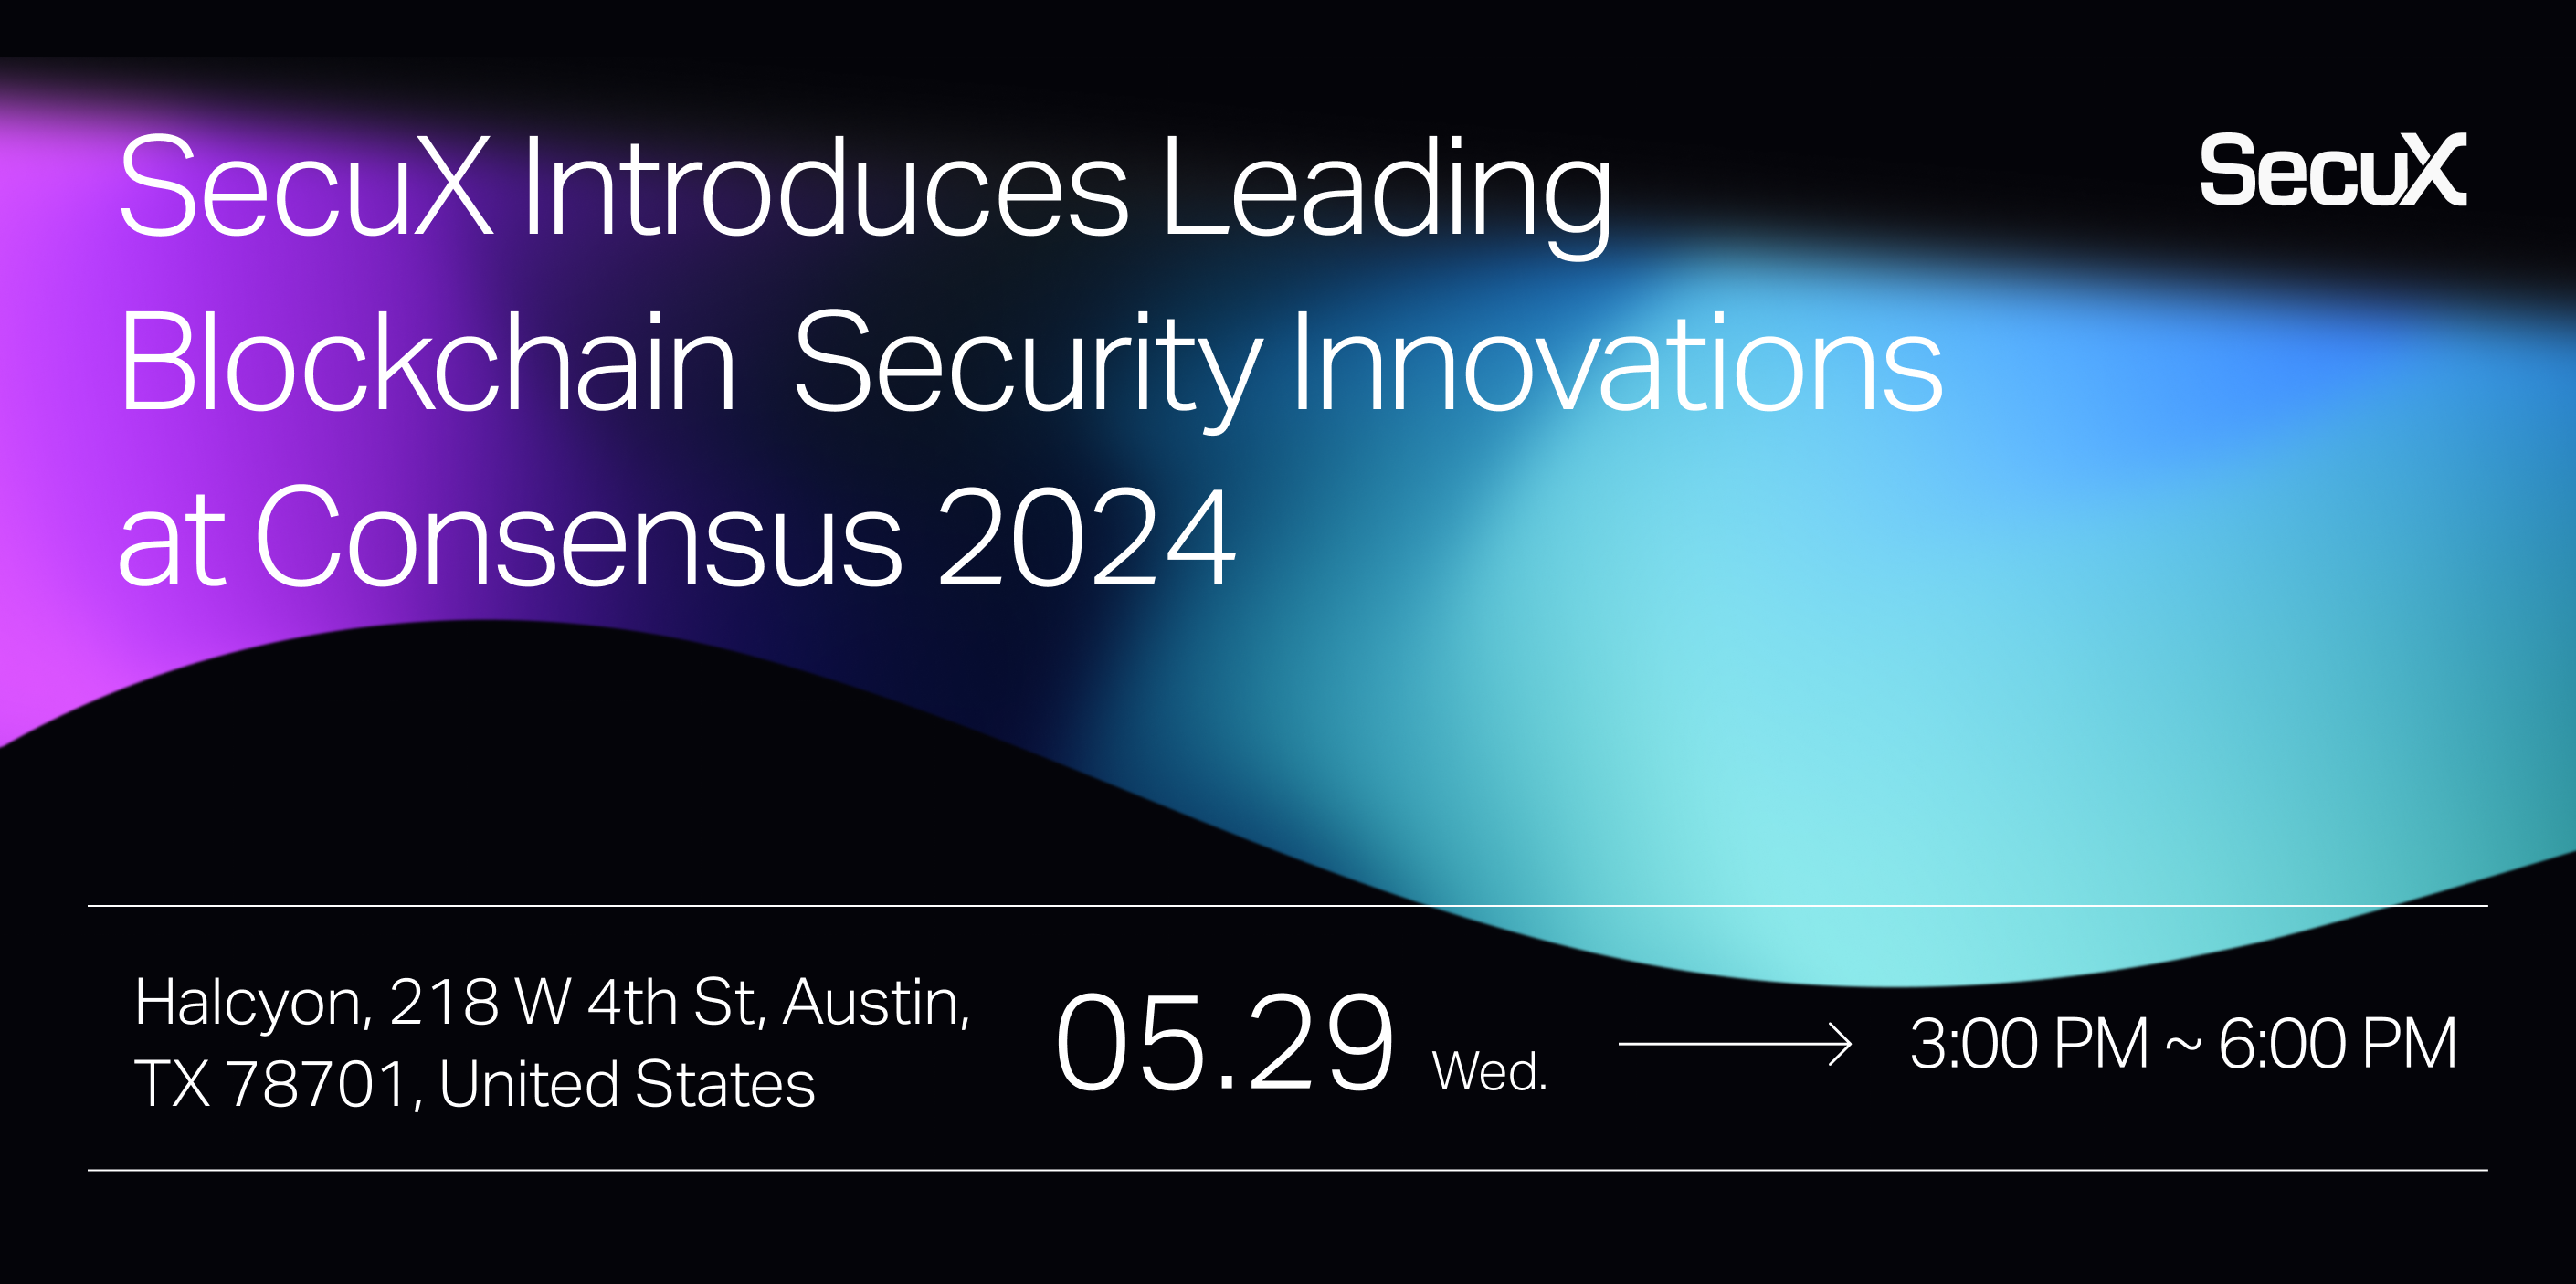 SecuX Introduces Cutting-Edge Blockchain Security Innovations at Consensus 2024